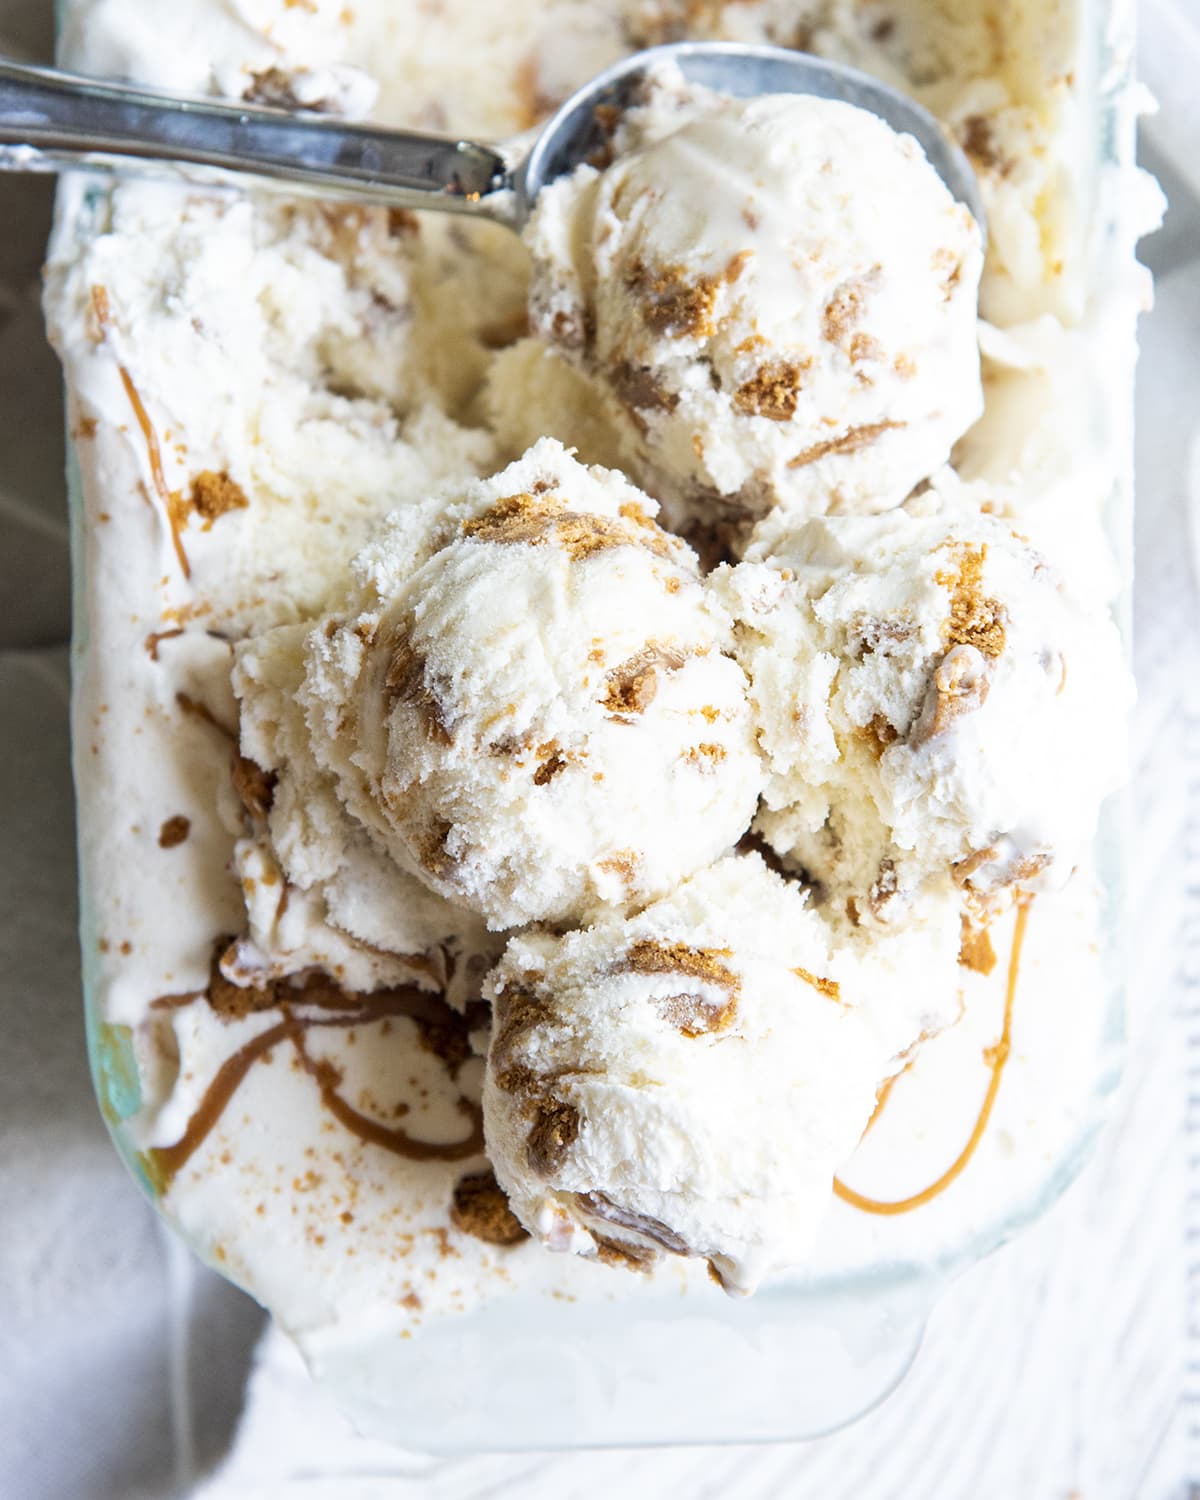 Scoops of Biscoff ice cream at the end of a pan of ice cream.